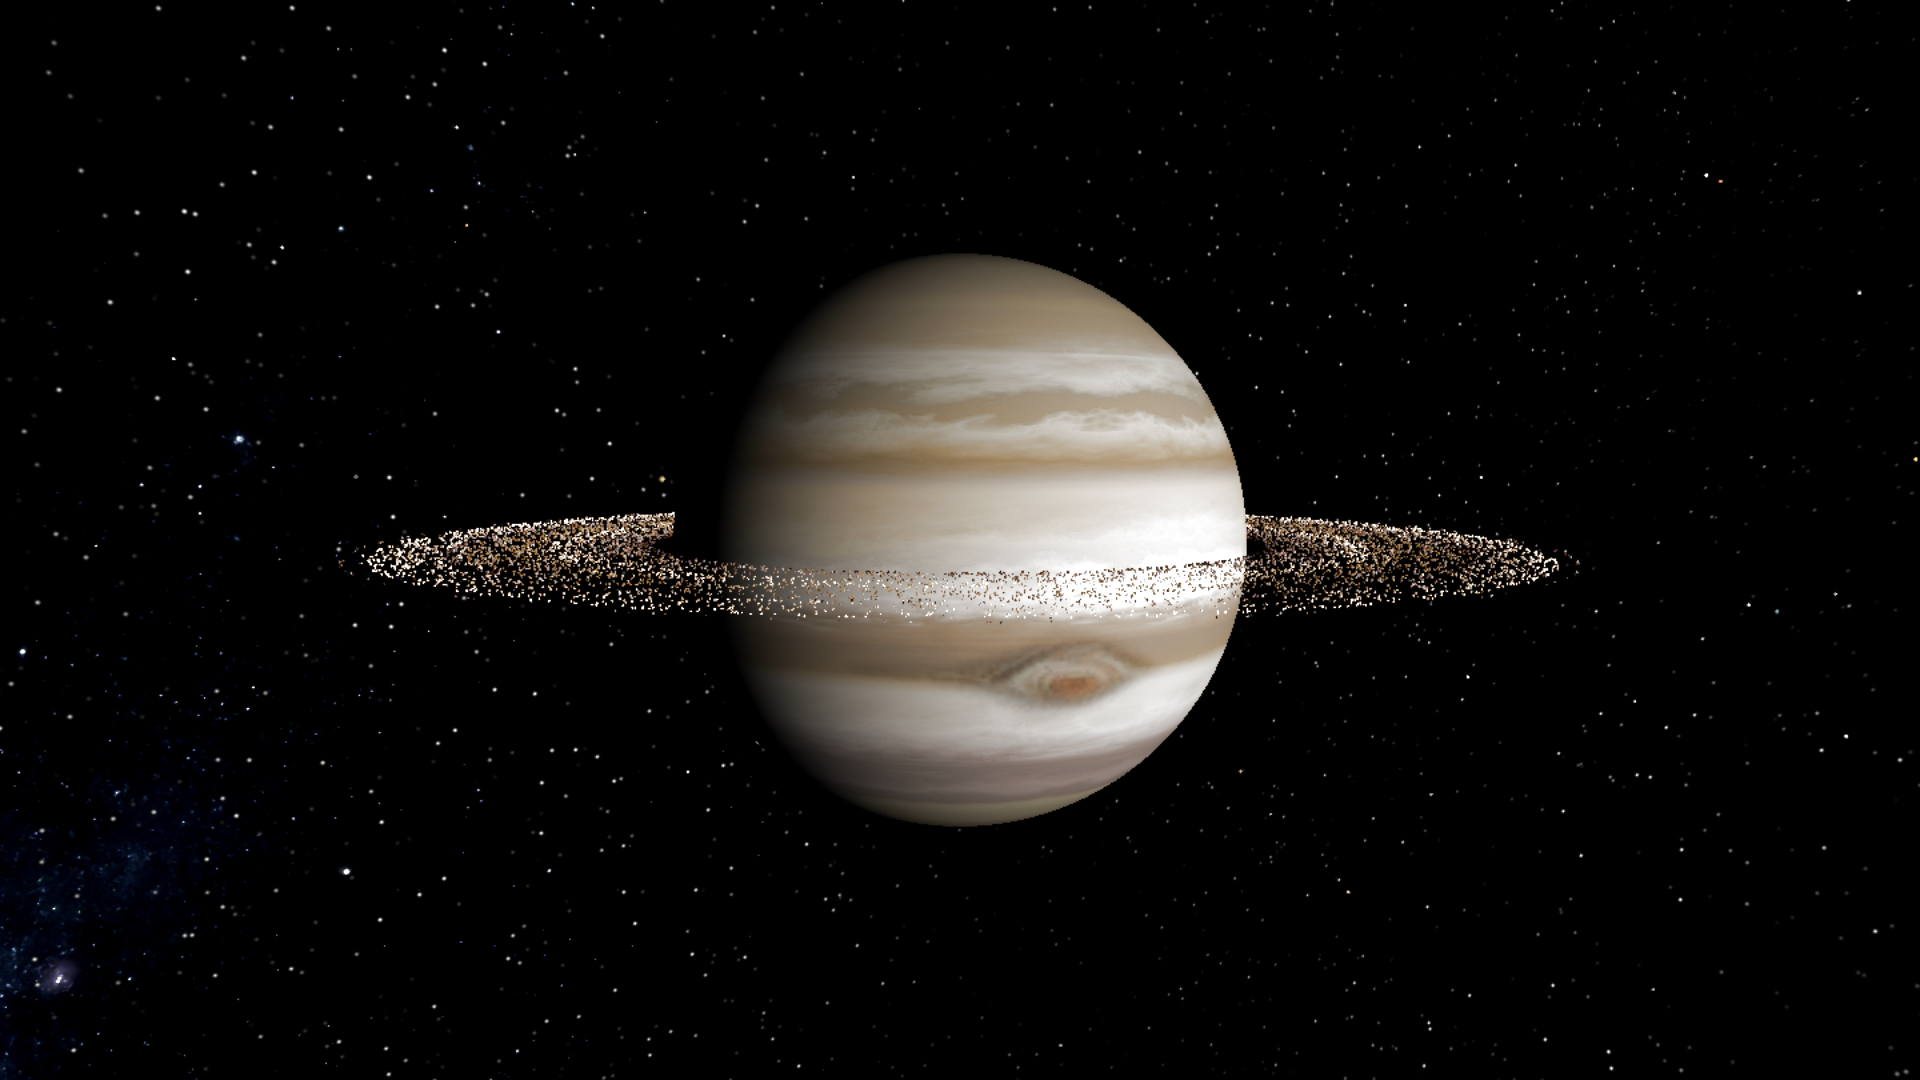 Saturn's rings may have formed from a shattered moon • Earth.com